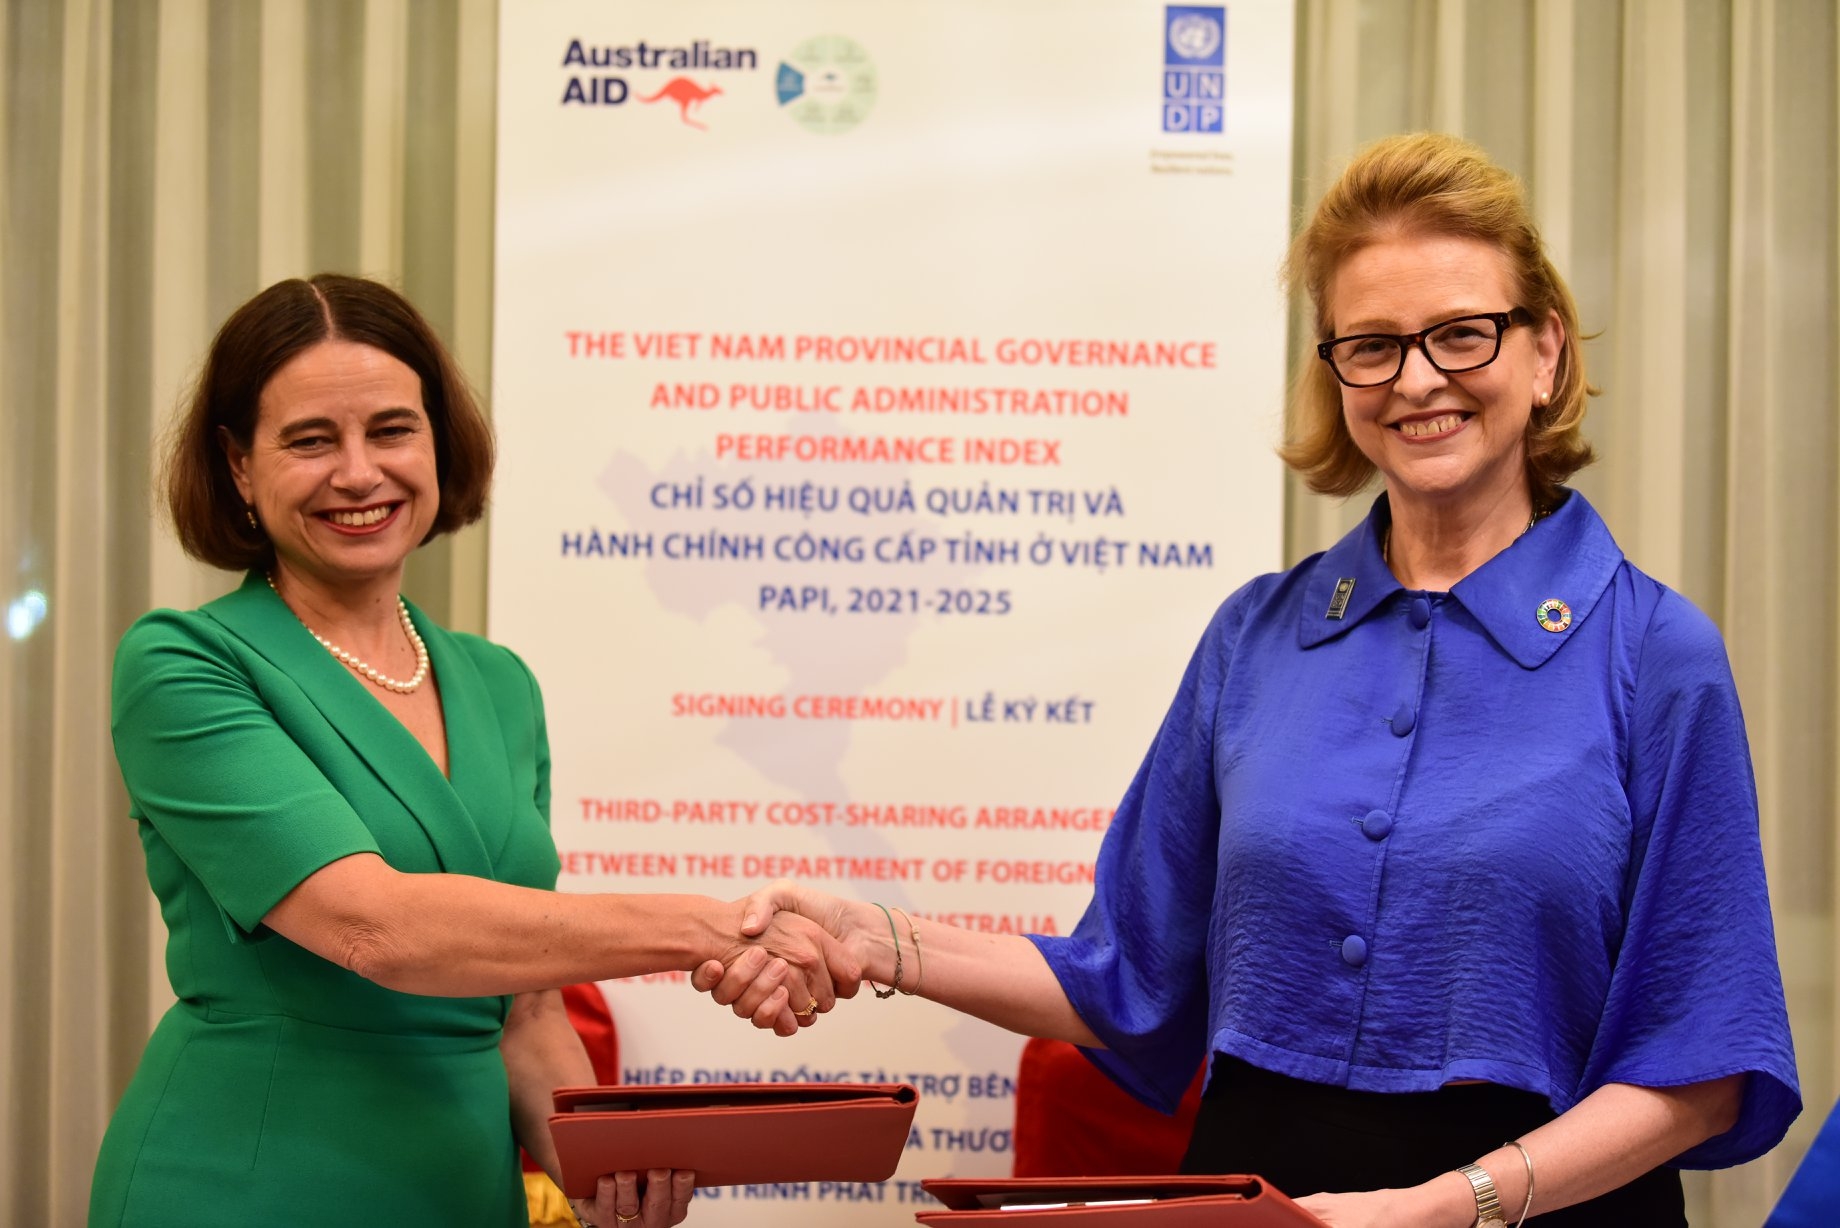 australia provides additional funding of usd 67 million to vietnams public administration reform and improvement